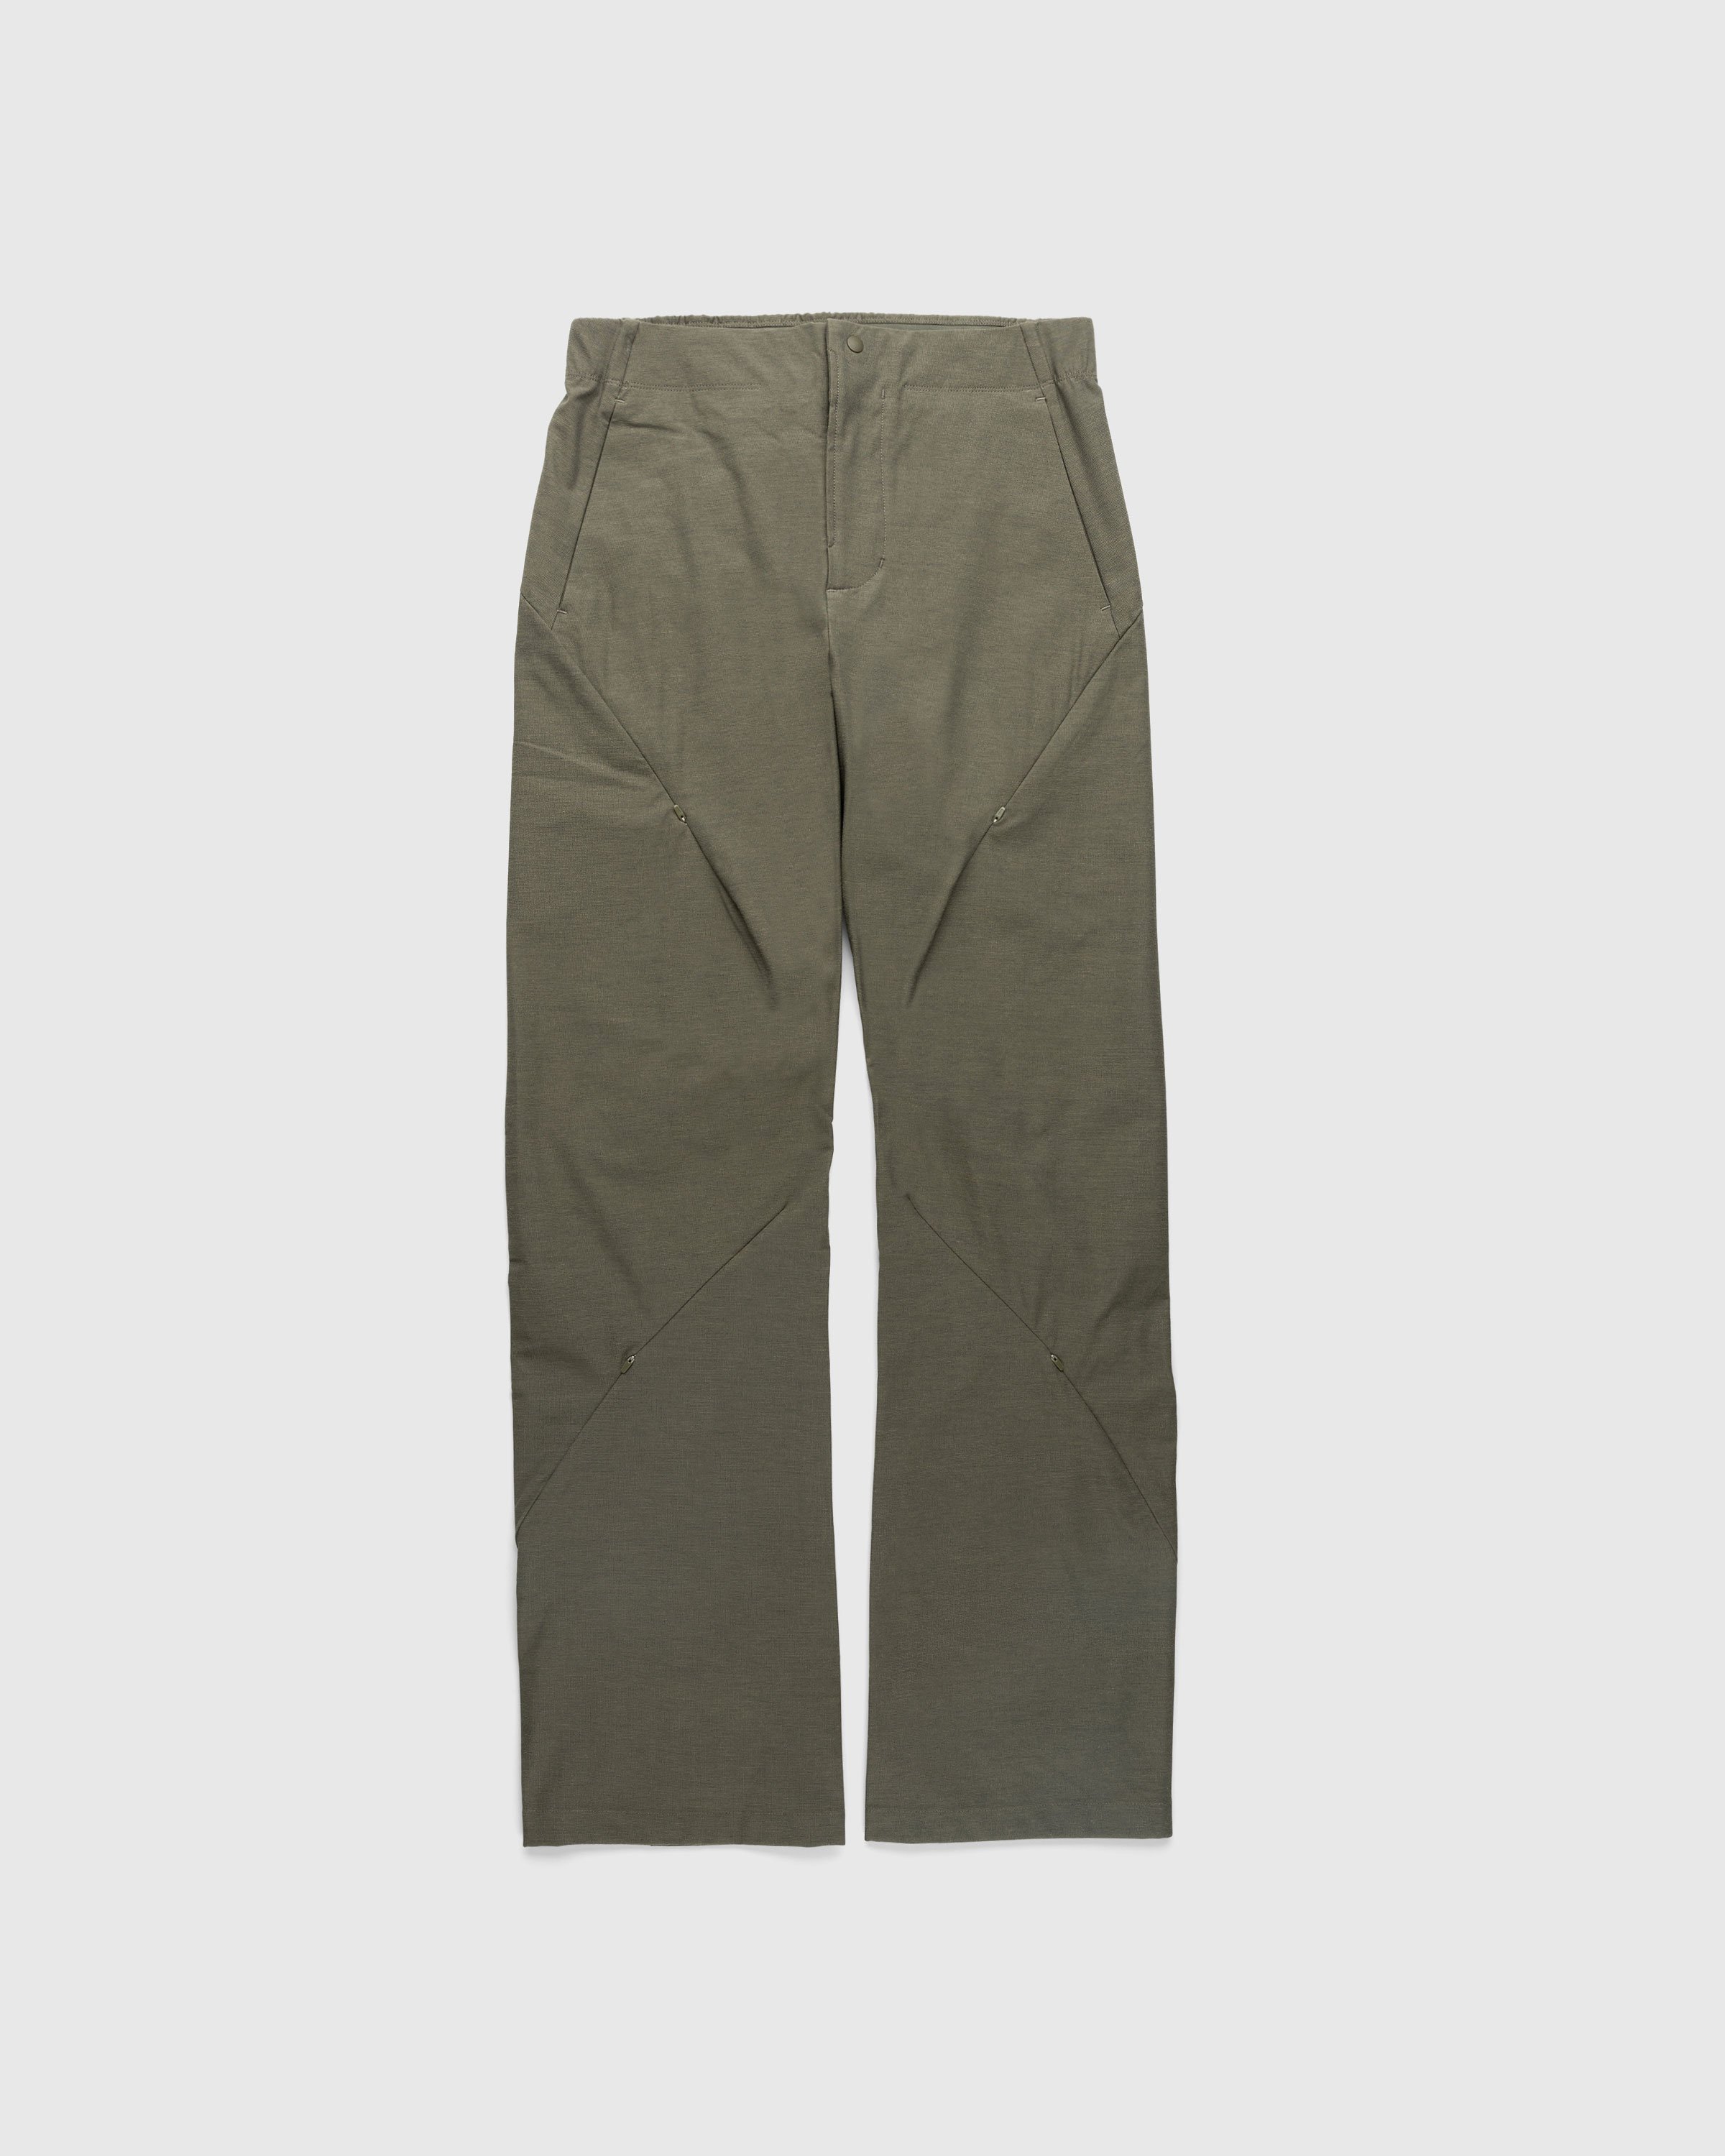 Post Archive Faction (PAF) – 5.1 Technical Pants Right Olive Green 